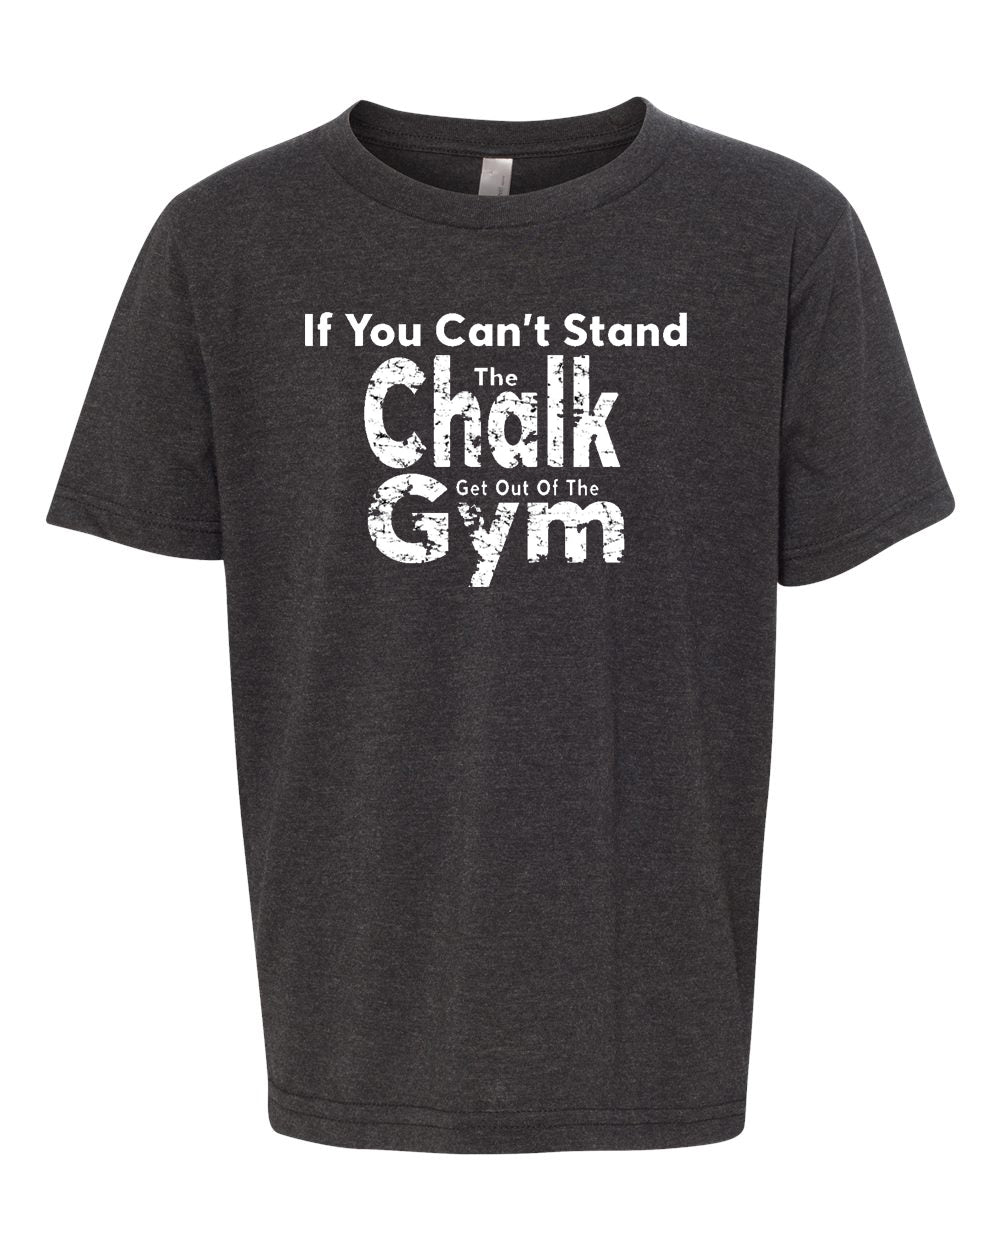 If You Can't Stand The Chalk Get Out Of The Gym Adult T-Shirt Charcoal